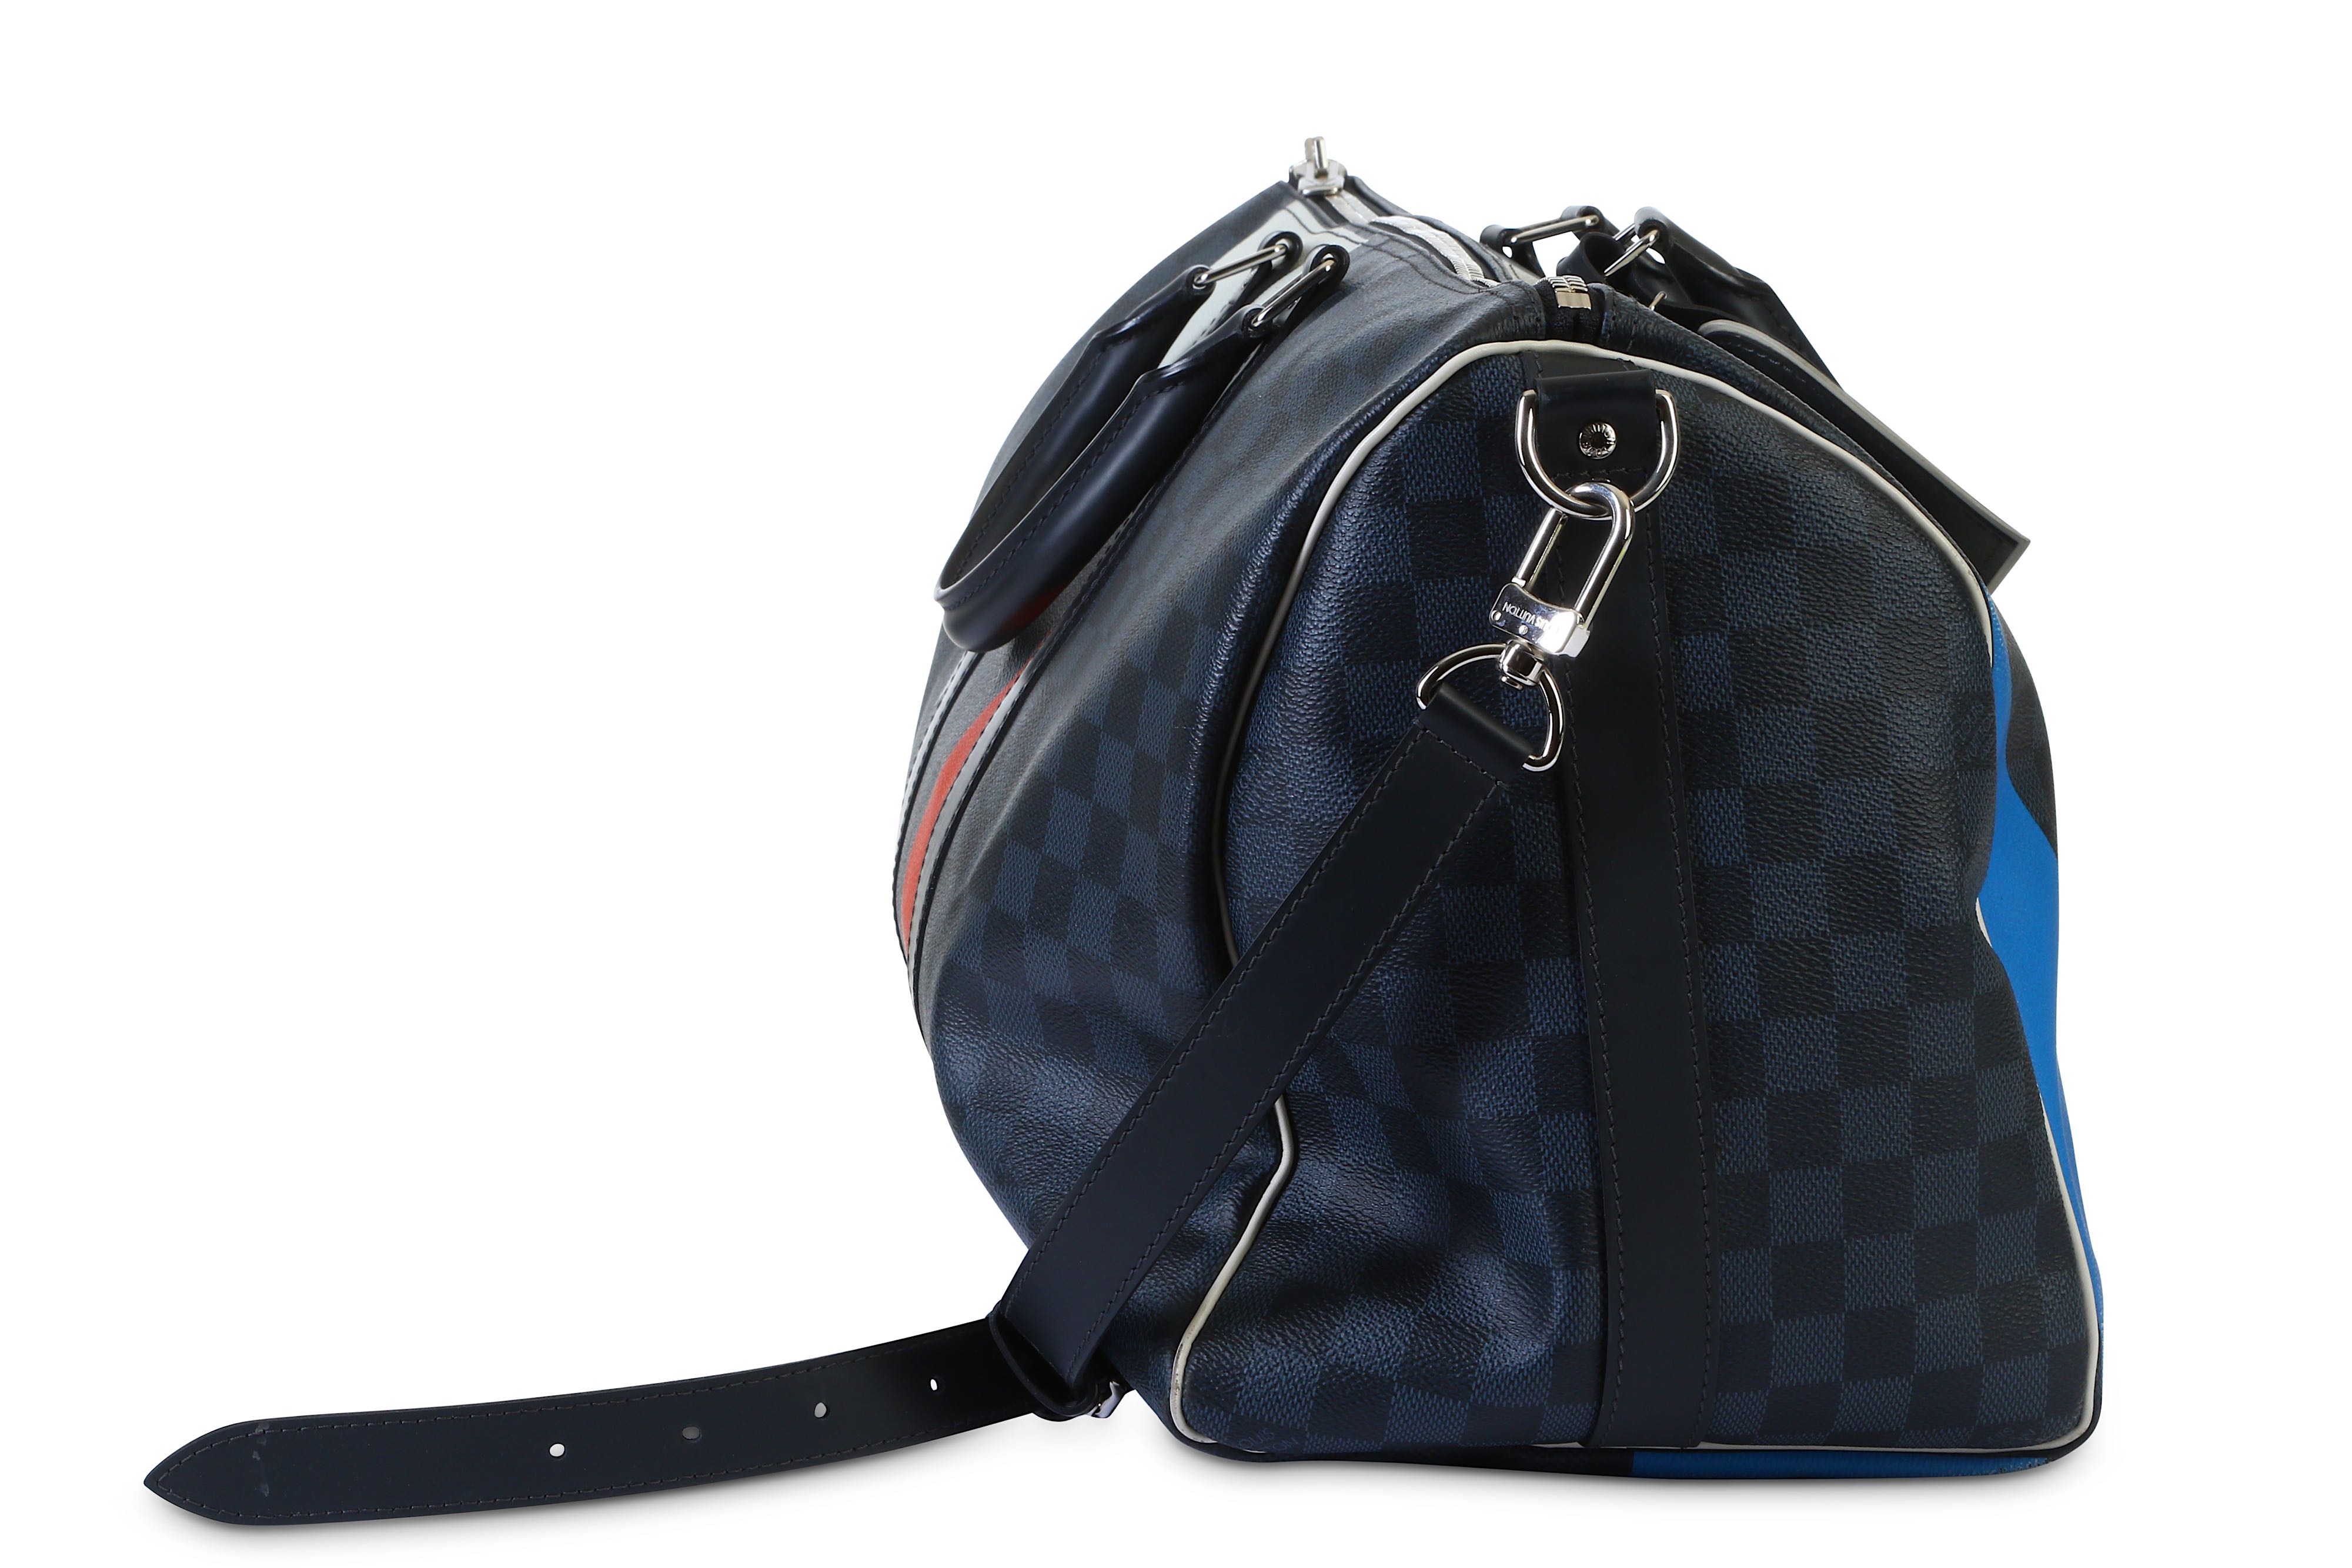 Sold x RARE LV America's Cup Keepall 55